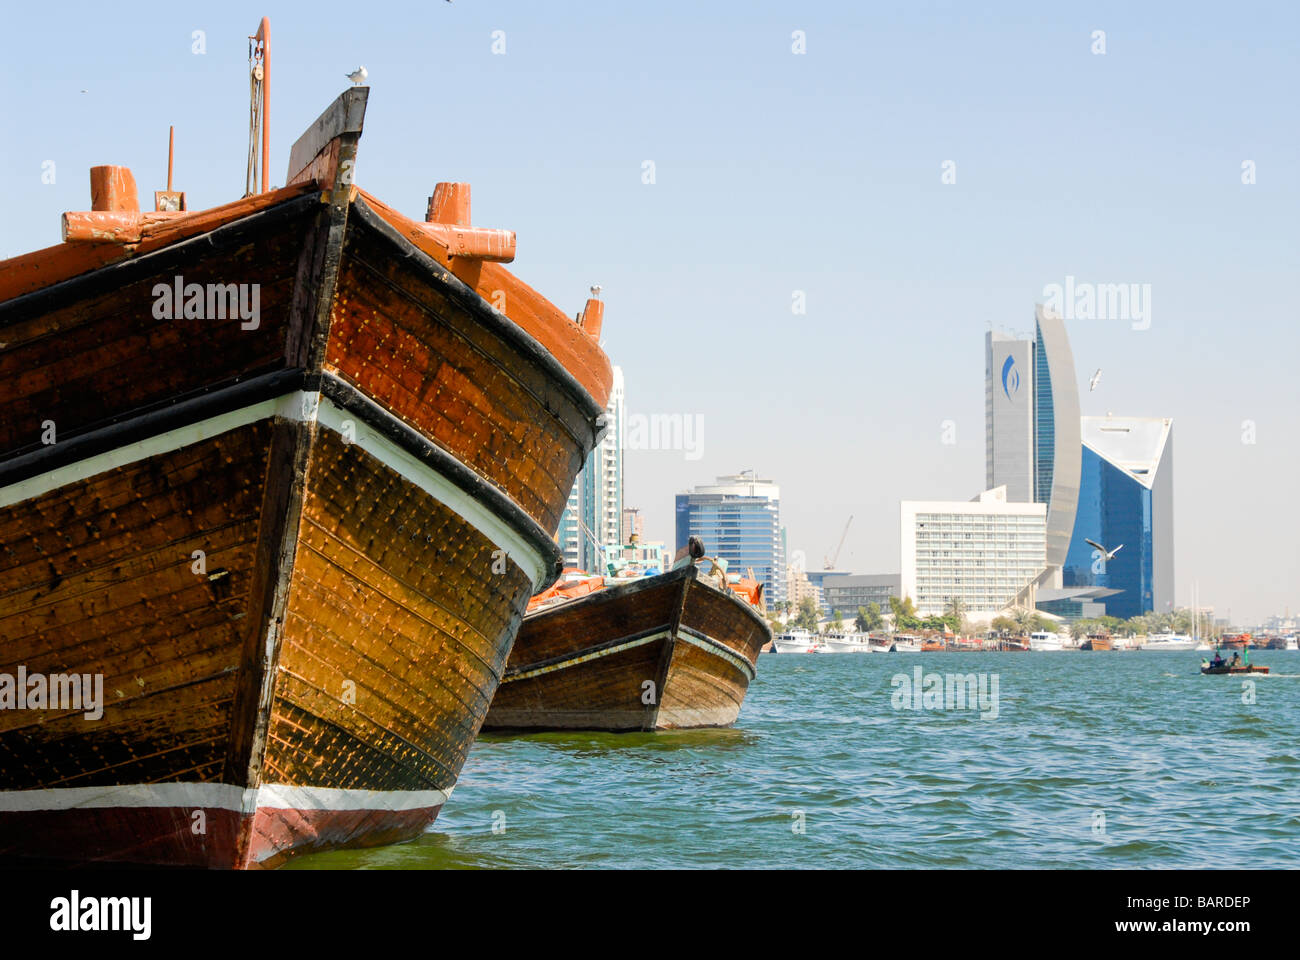 Dhows in front of hotel skyline, The Creek, Dubai, UAE Stock Photo